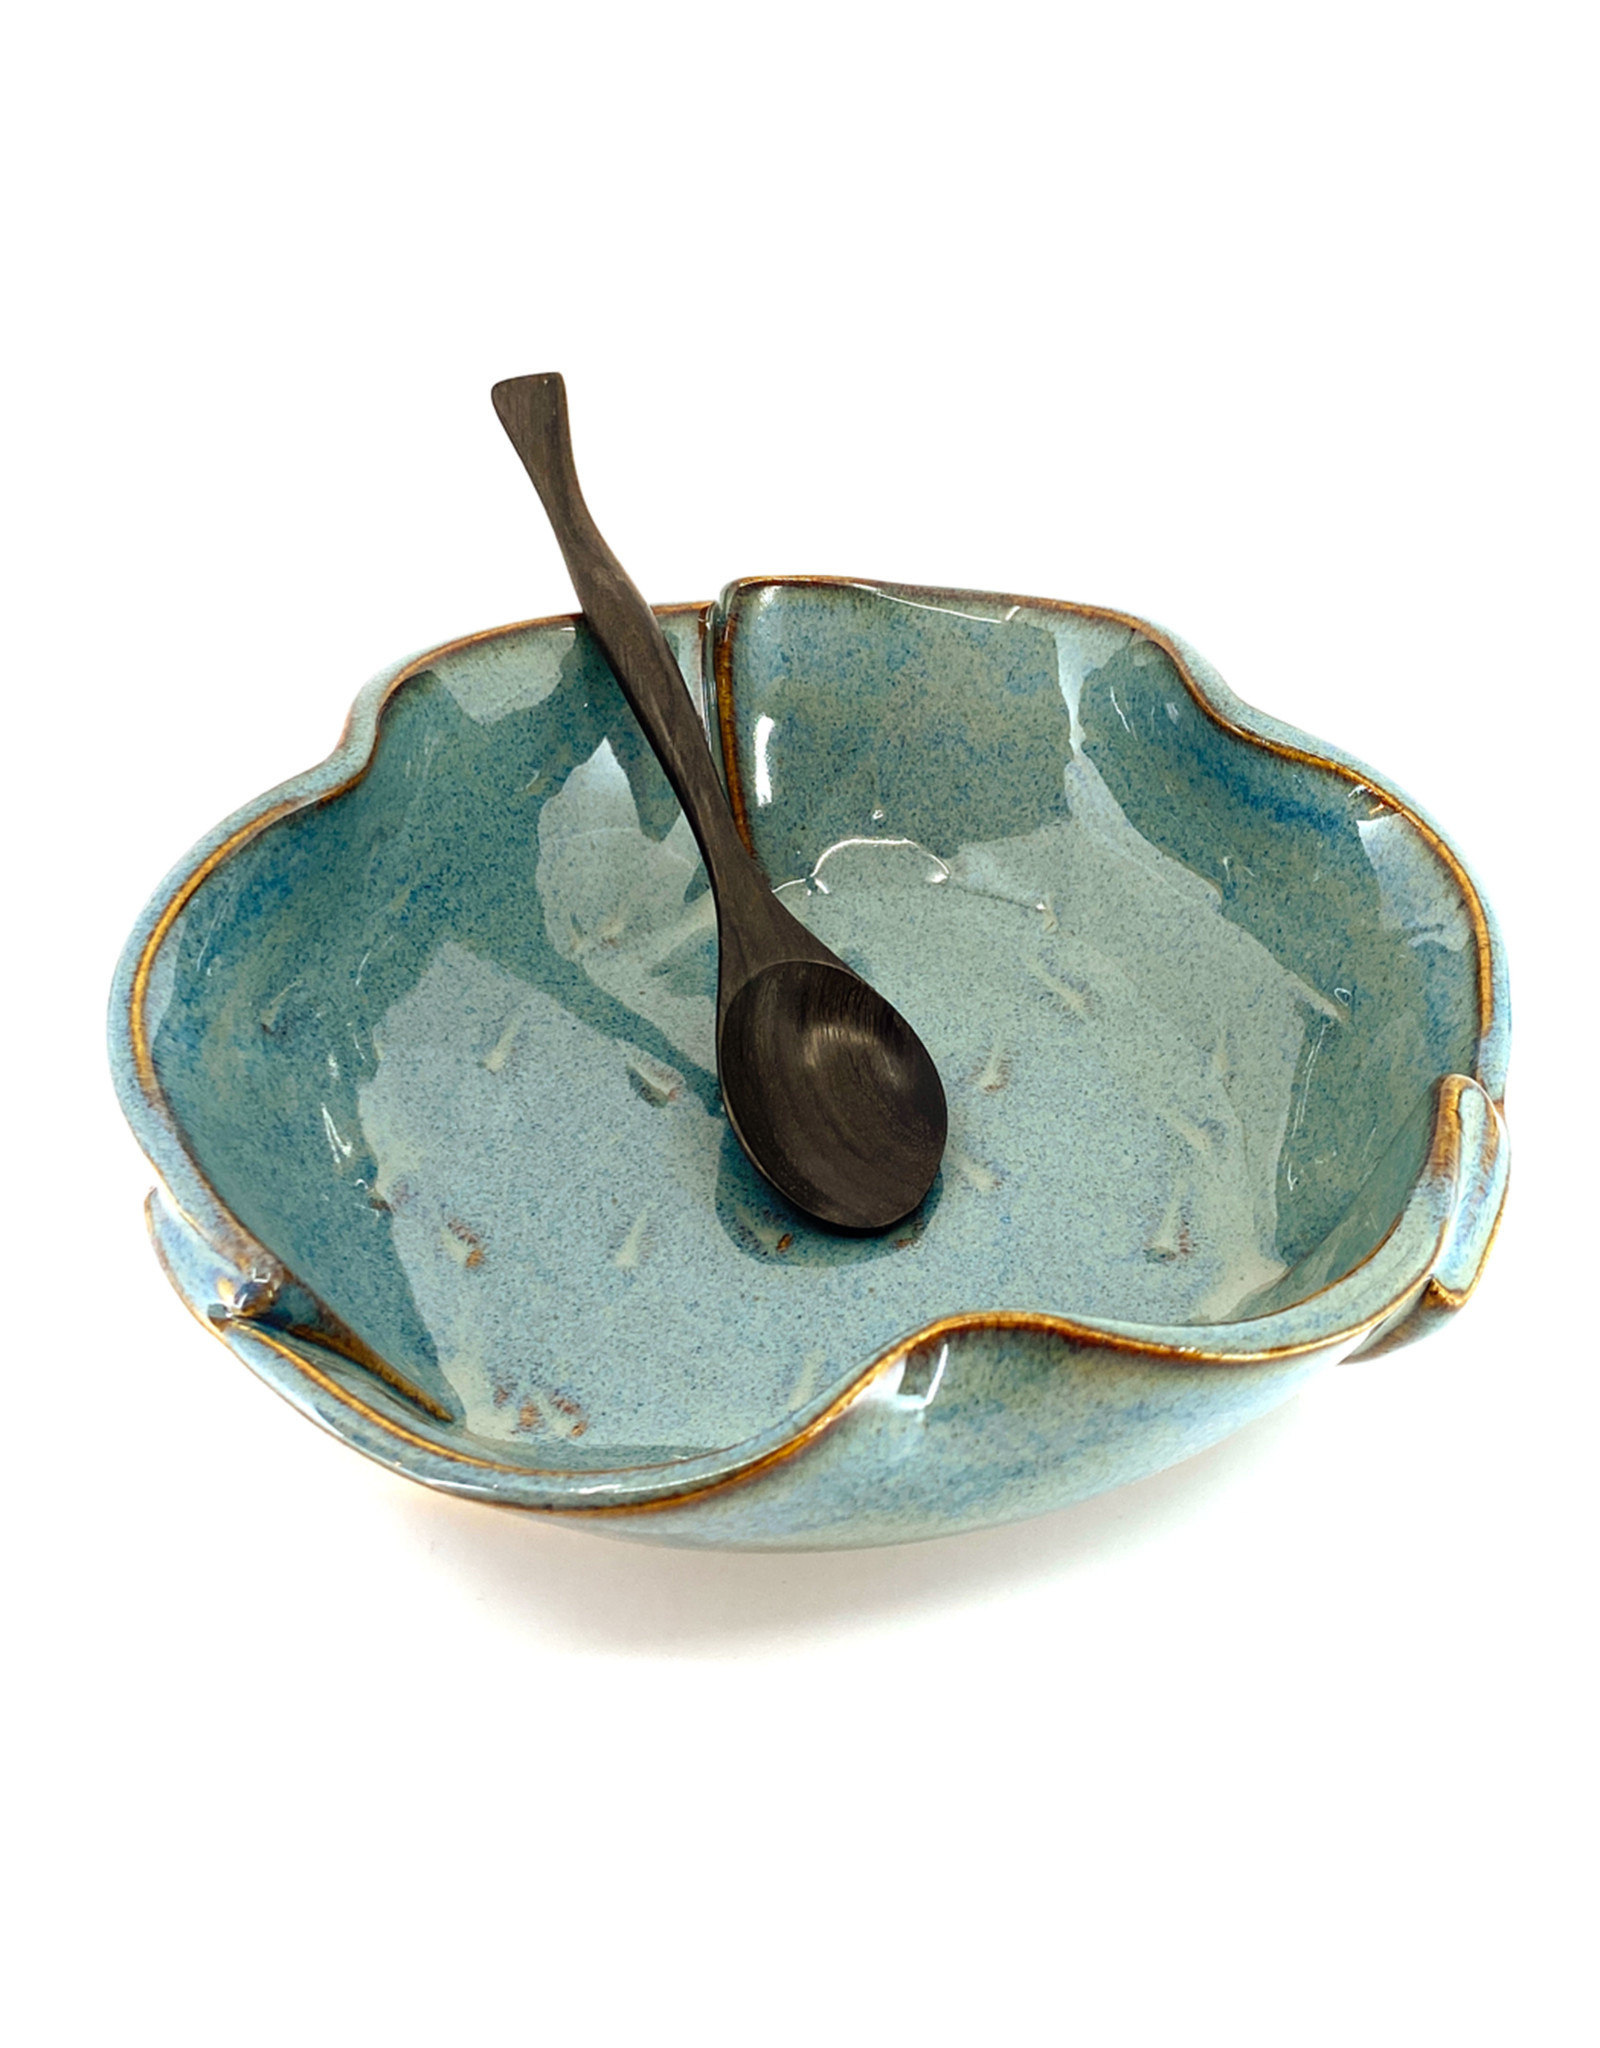 HILBORN POTTERY BLUE MEDLEY BRIE DISH WITH SPOON